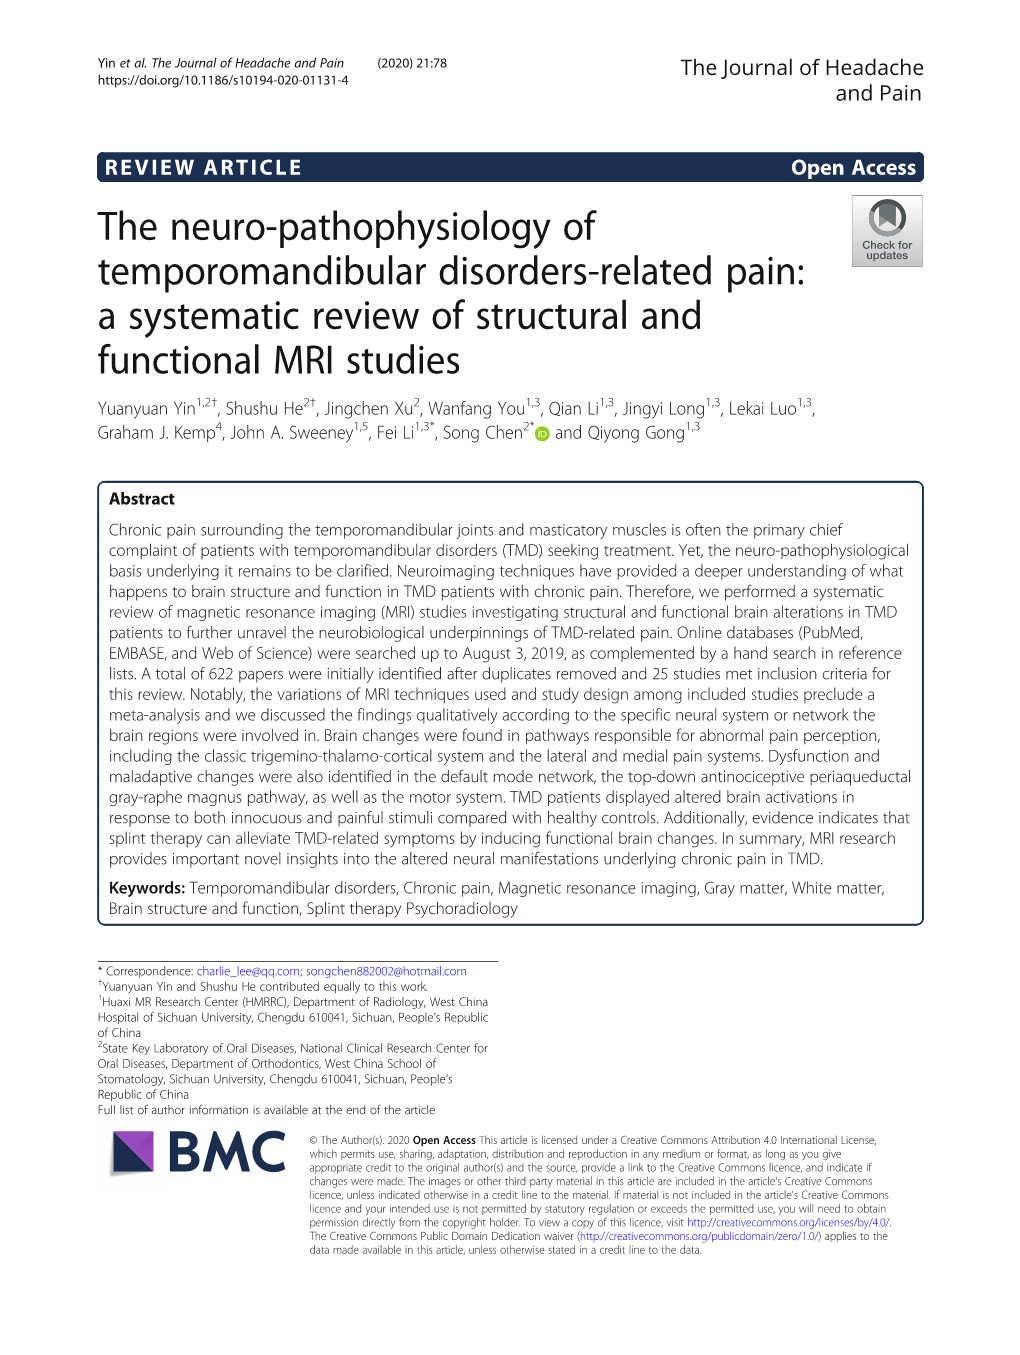 A Systematic Review of Structural and Functional MRI Stud